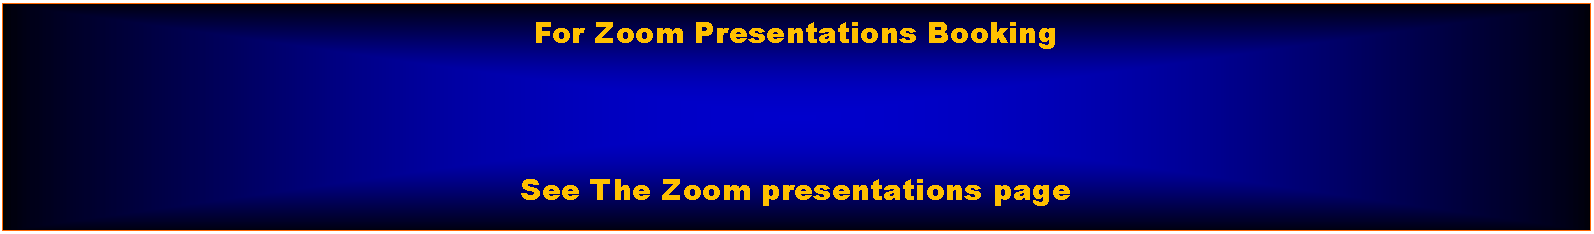 Text Box: For Zoom Presentations BookingSee The Zoom presentations page